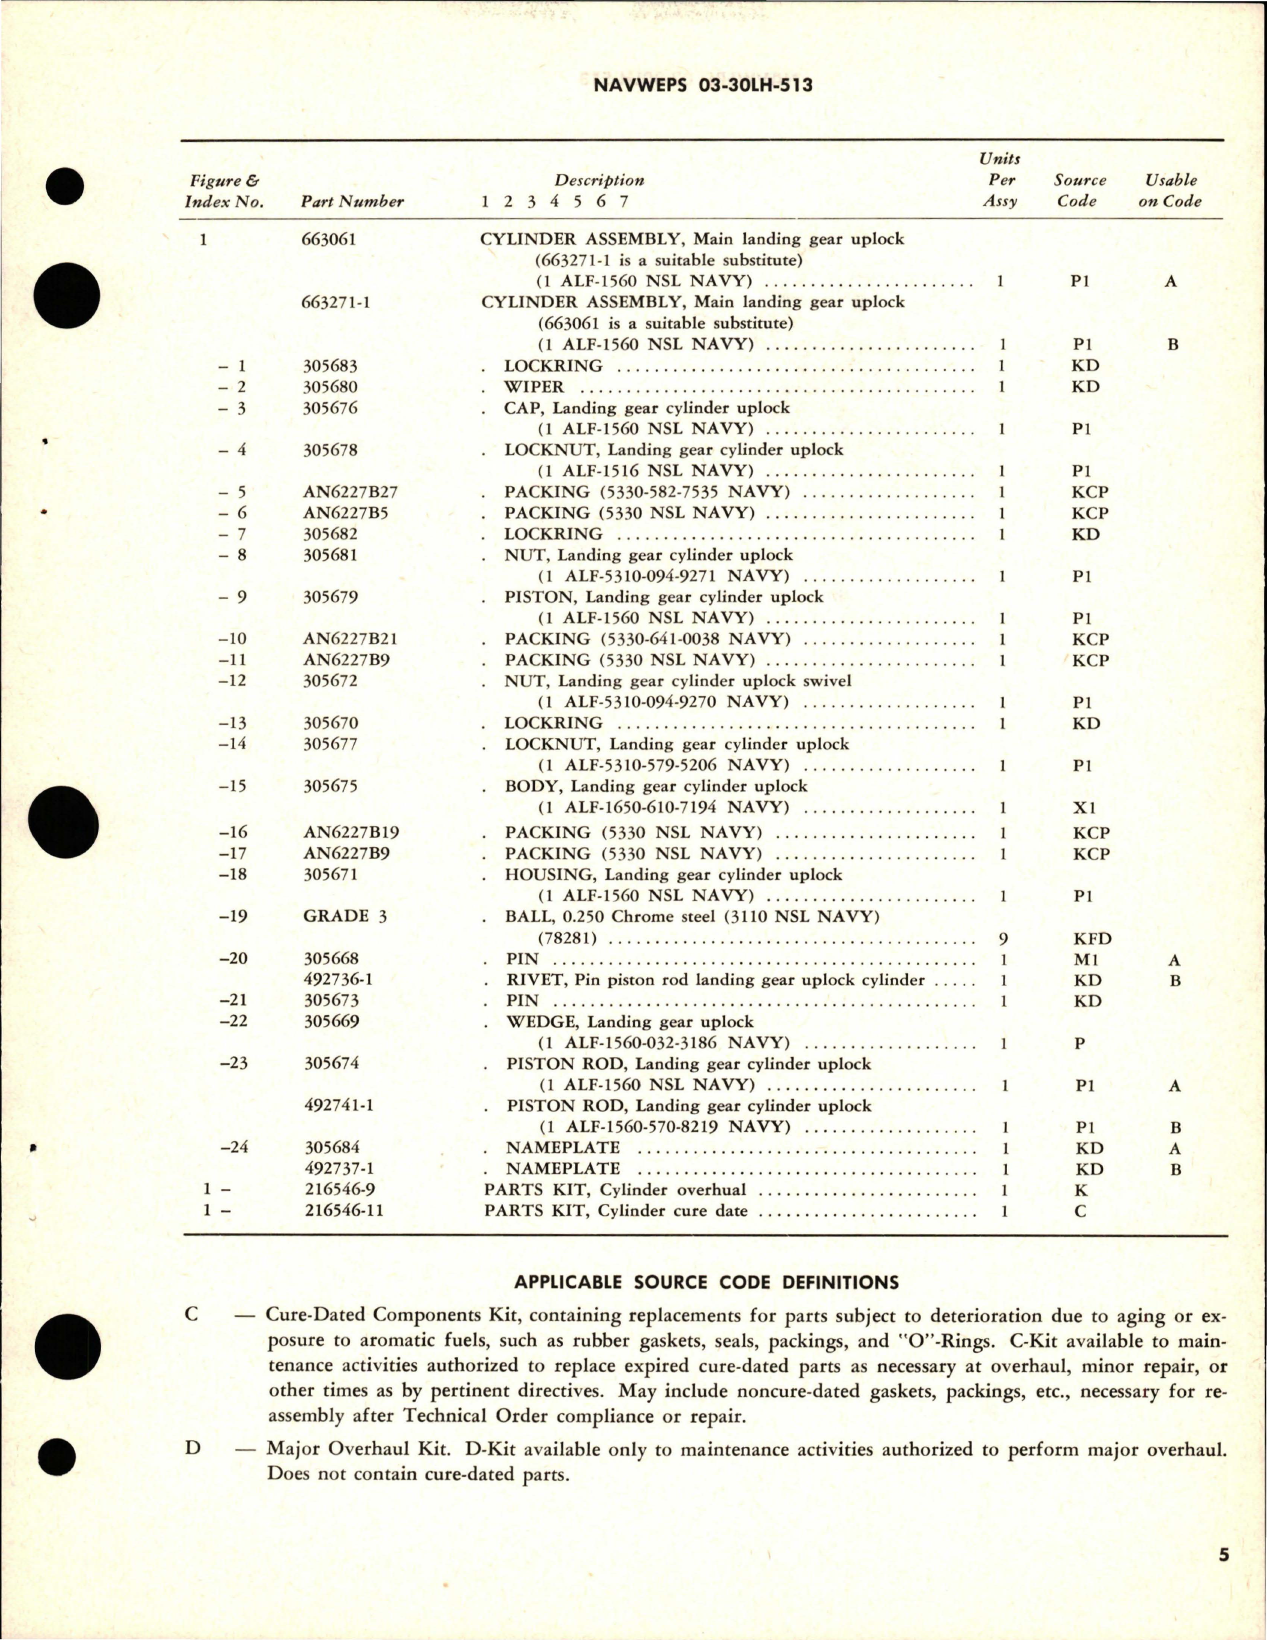 Sample page 5 from AirCorps Library document: Overhaul Instructions with Parts Breakdown for Main Landing Gear Uplock Cylinder Assembly - Part 663061 and 663271-1